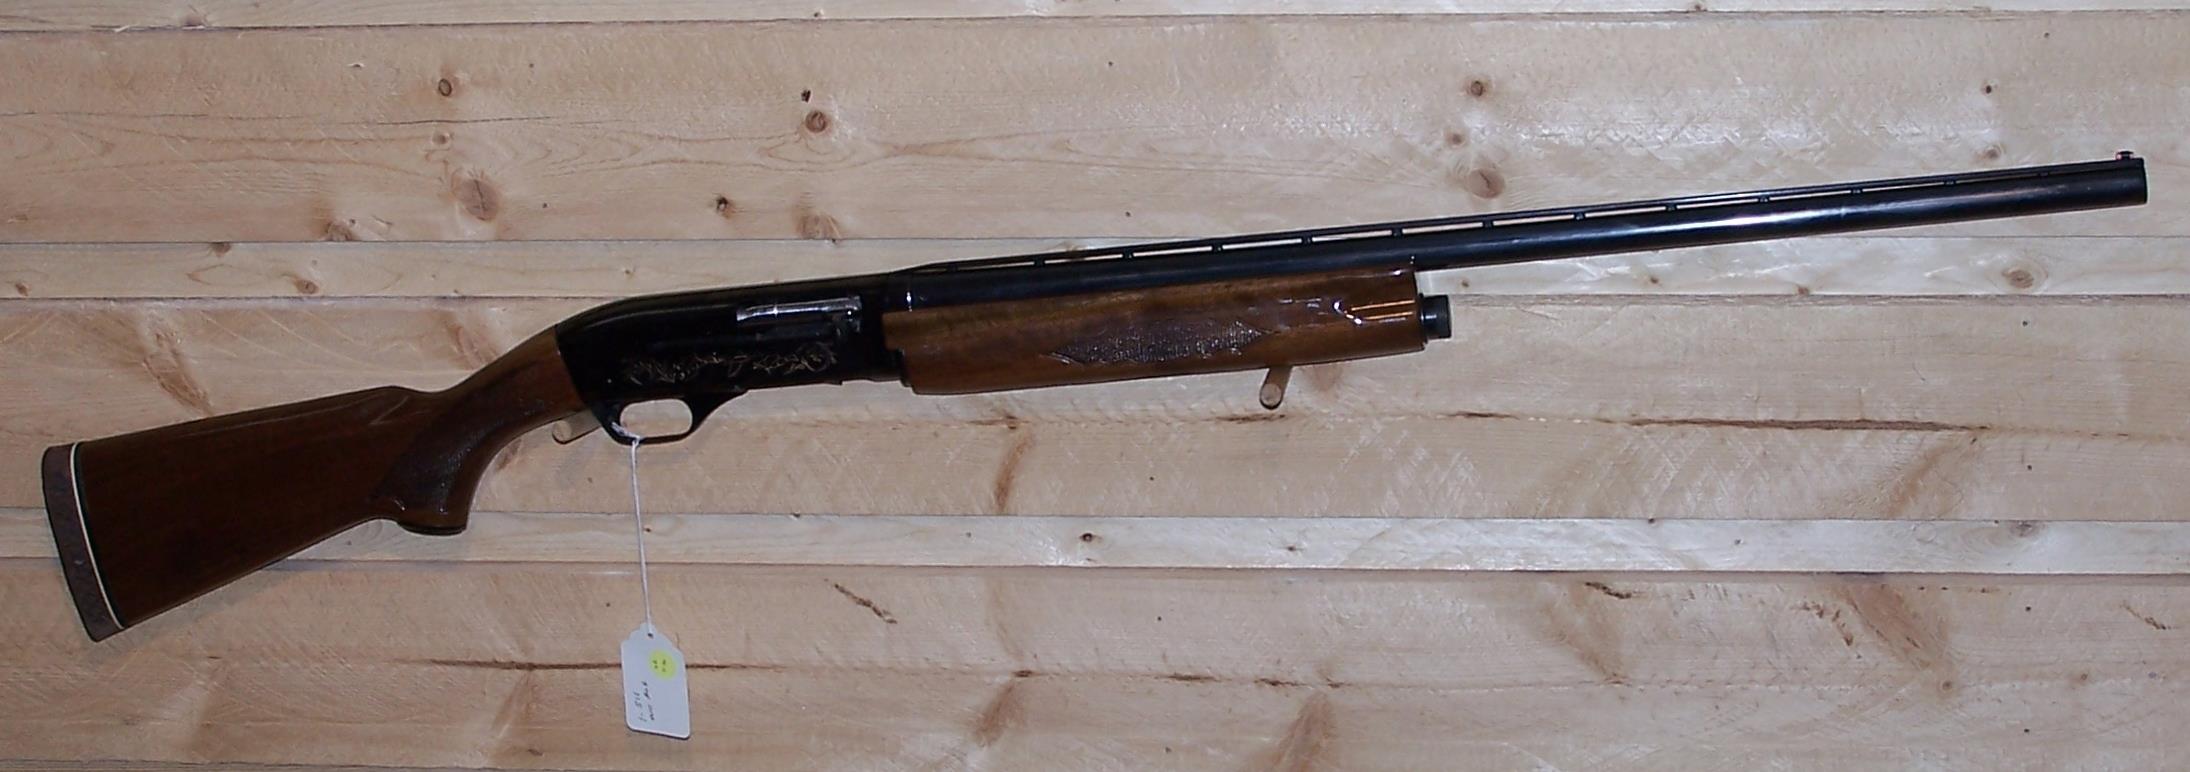 parts of a ithaca 37 shotgun and their functions